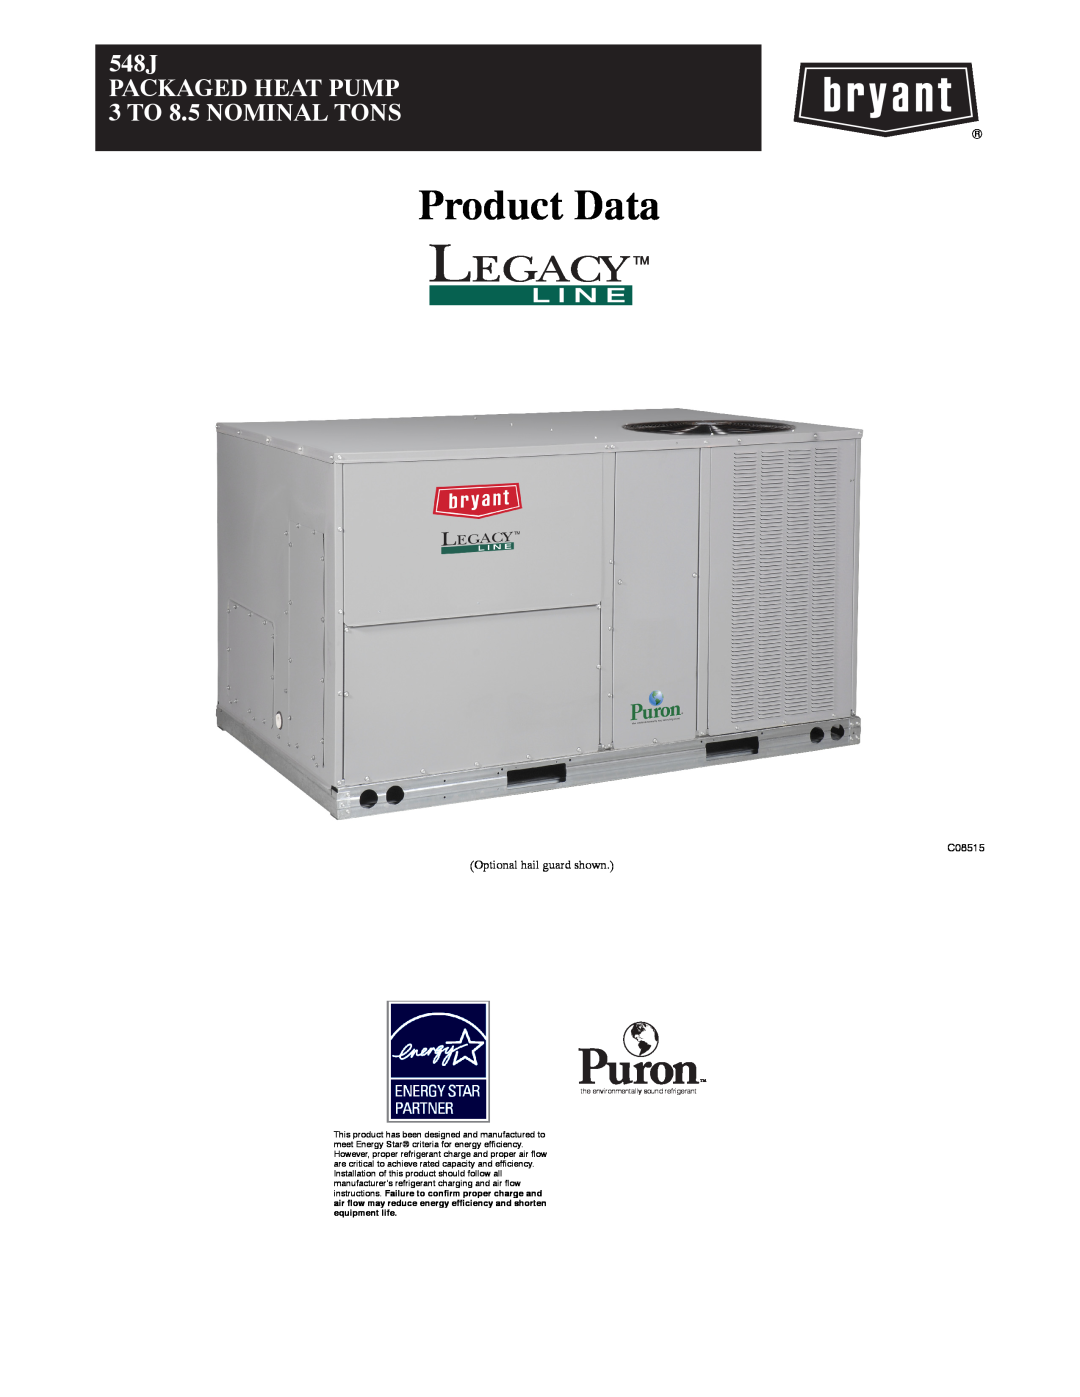 Bryant 548J manual Product Data, PACKAGED HEAT PUMP 3 TO 8.5 NOMINAL TONS, C08515 